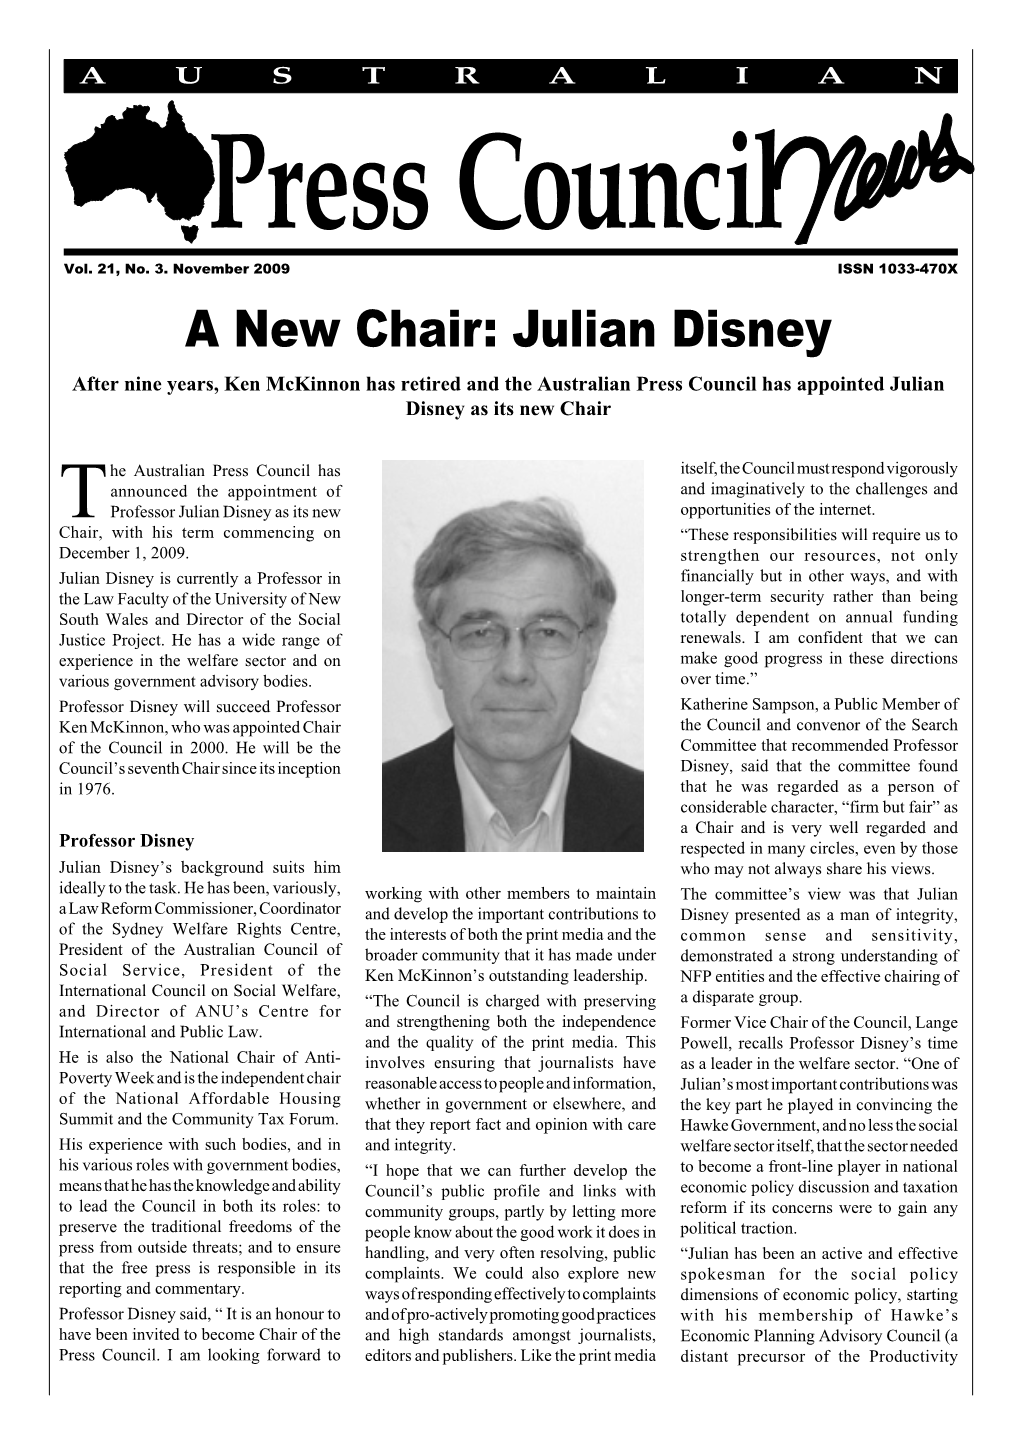 A New Chair: Julian Disney After Nine Years, Ken Mckinnon Has Retired and the Australian Press Council Has Appointed Julian Disney As Its New Chair